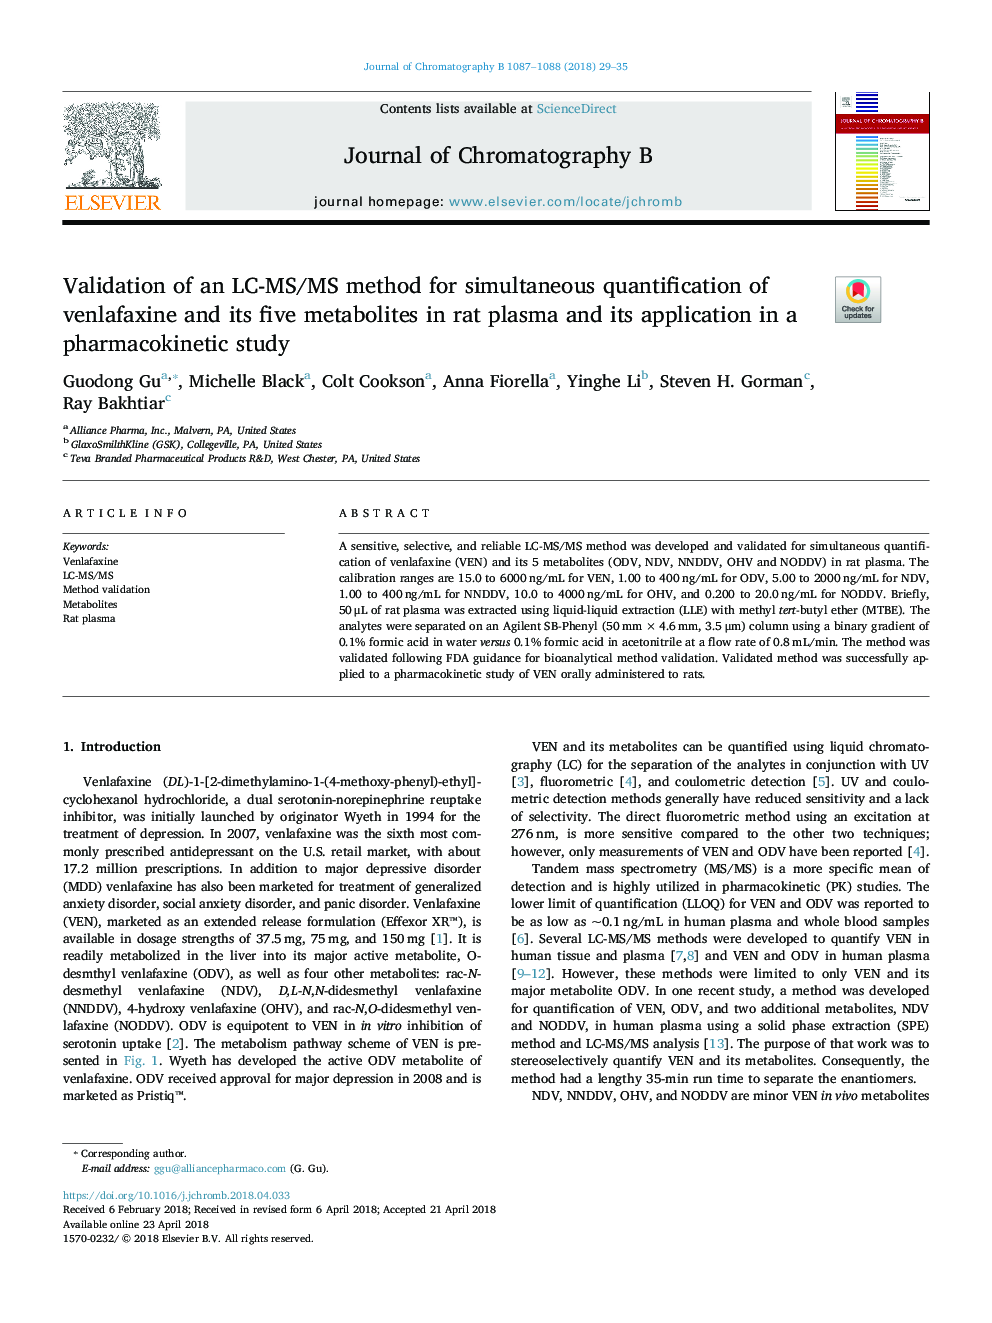 Validation of an LC-MS/MS method for simultaneous quantification of venlafaxine and its five metabolites in rat plasma and its application in a pharmacokinetic study